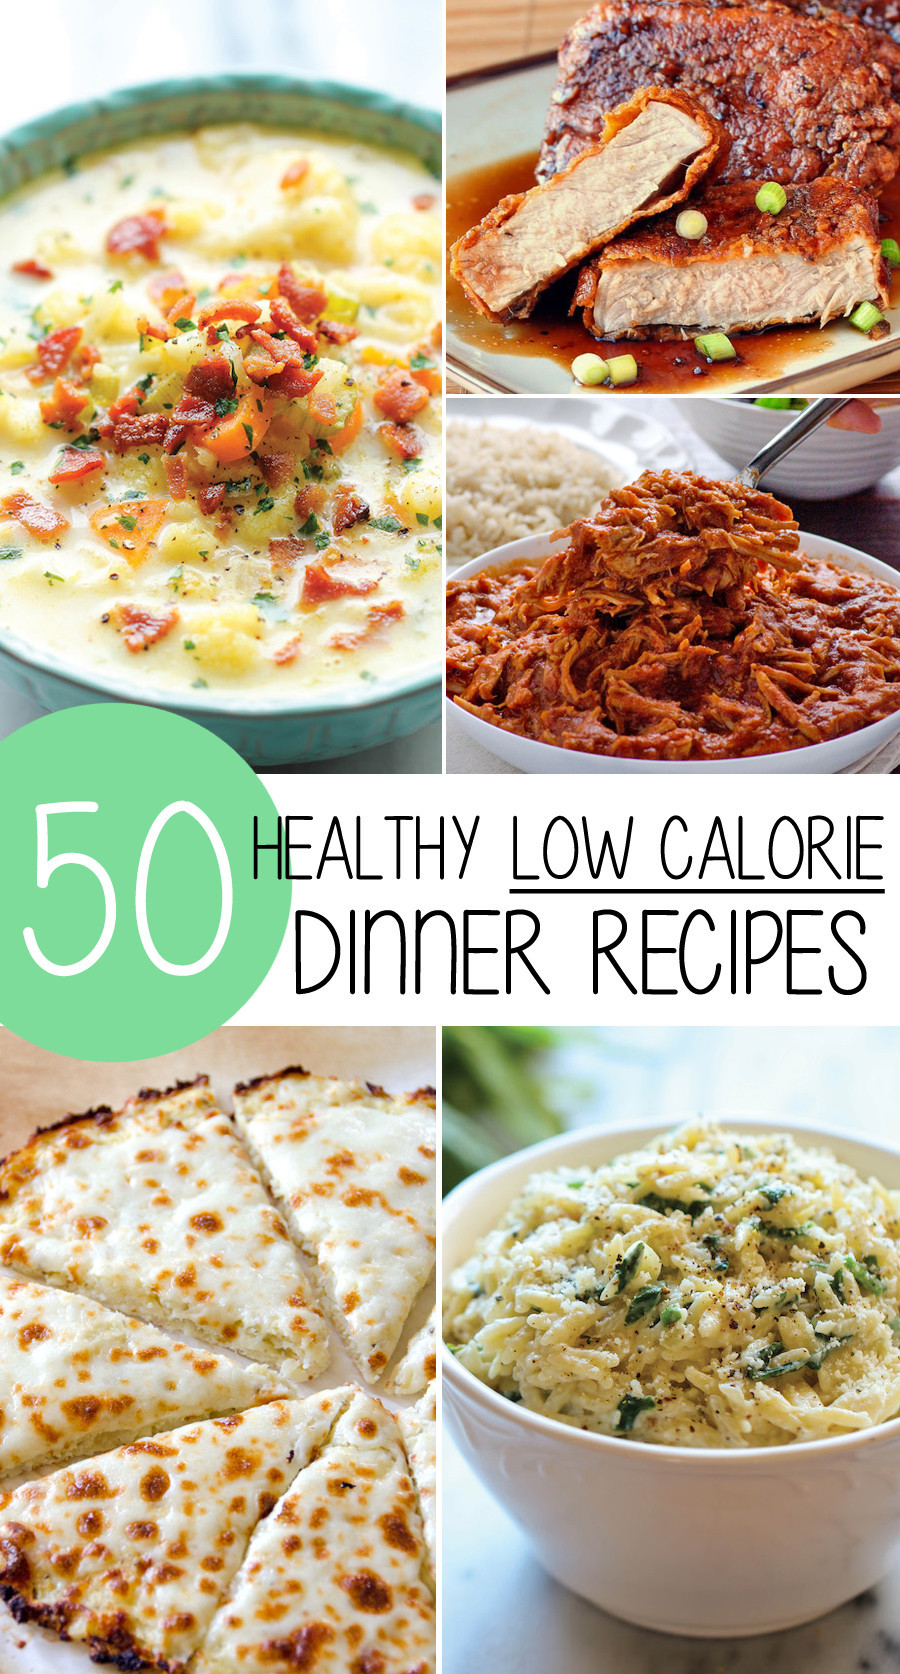 Low Fat Low Calorie Dinners
 20 Ideas for Quick Low Fat Dinners Best Diet and Healthy